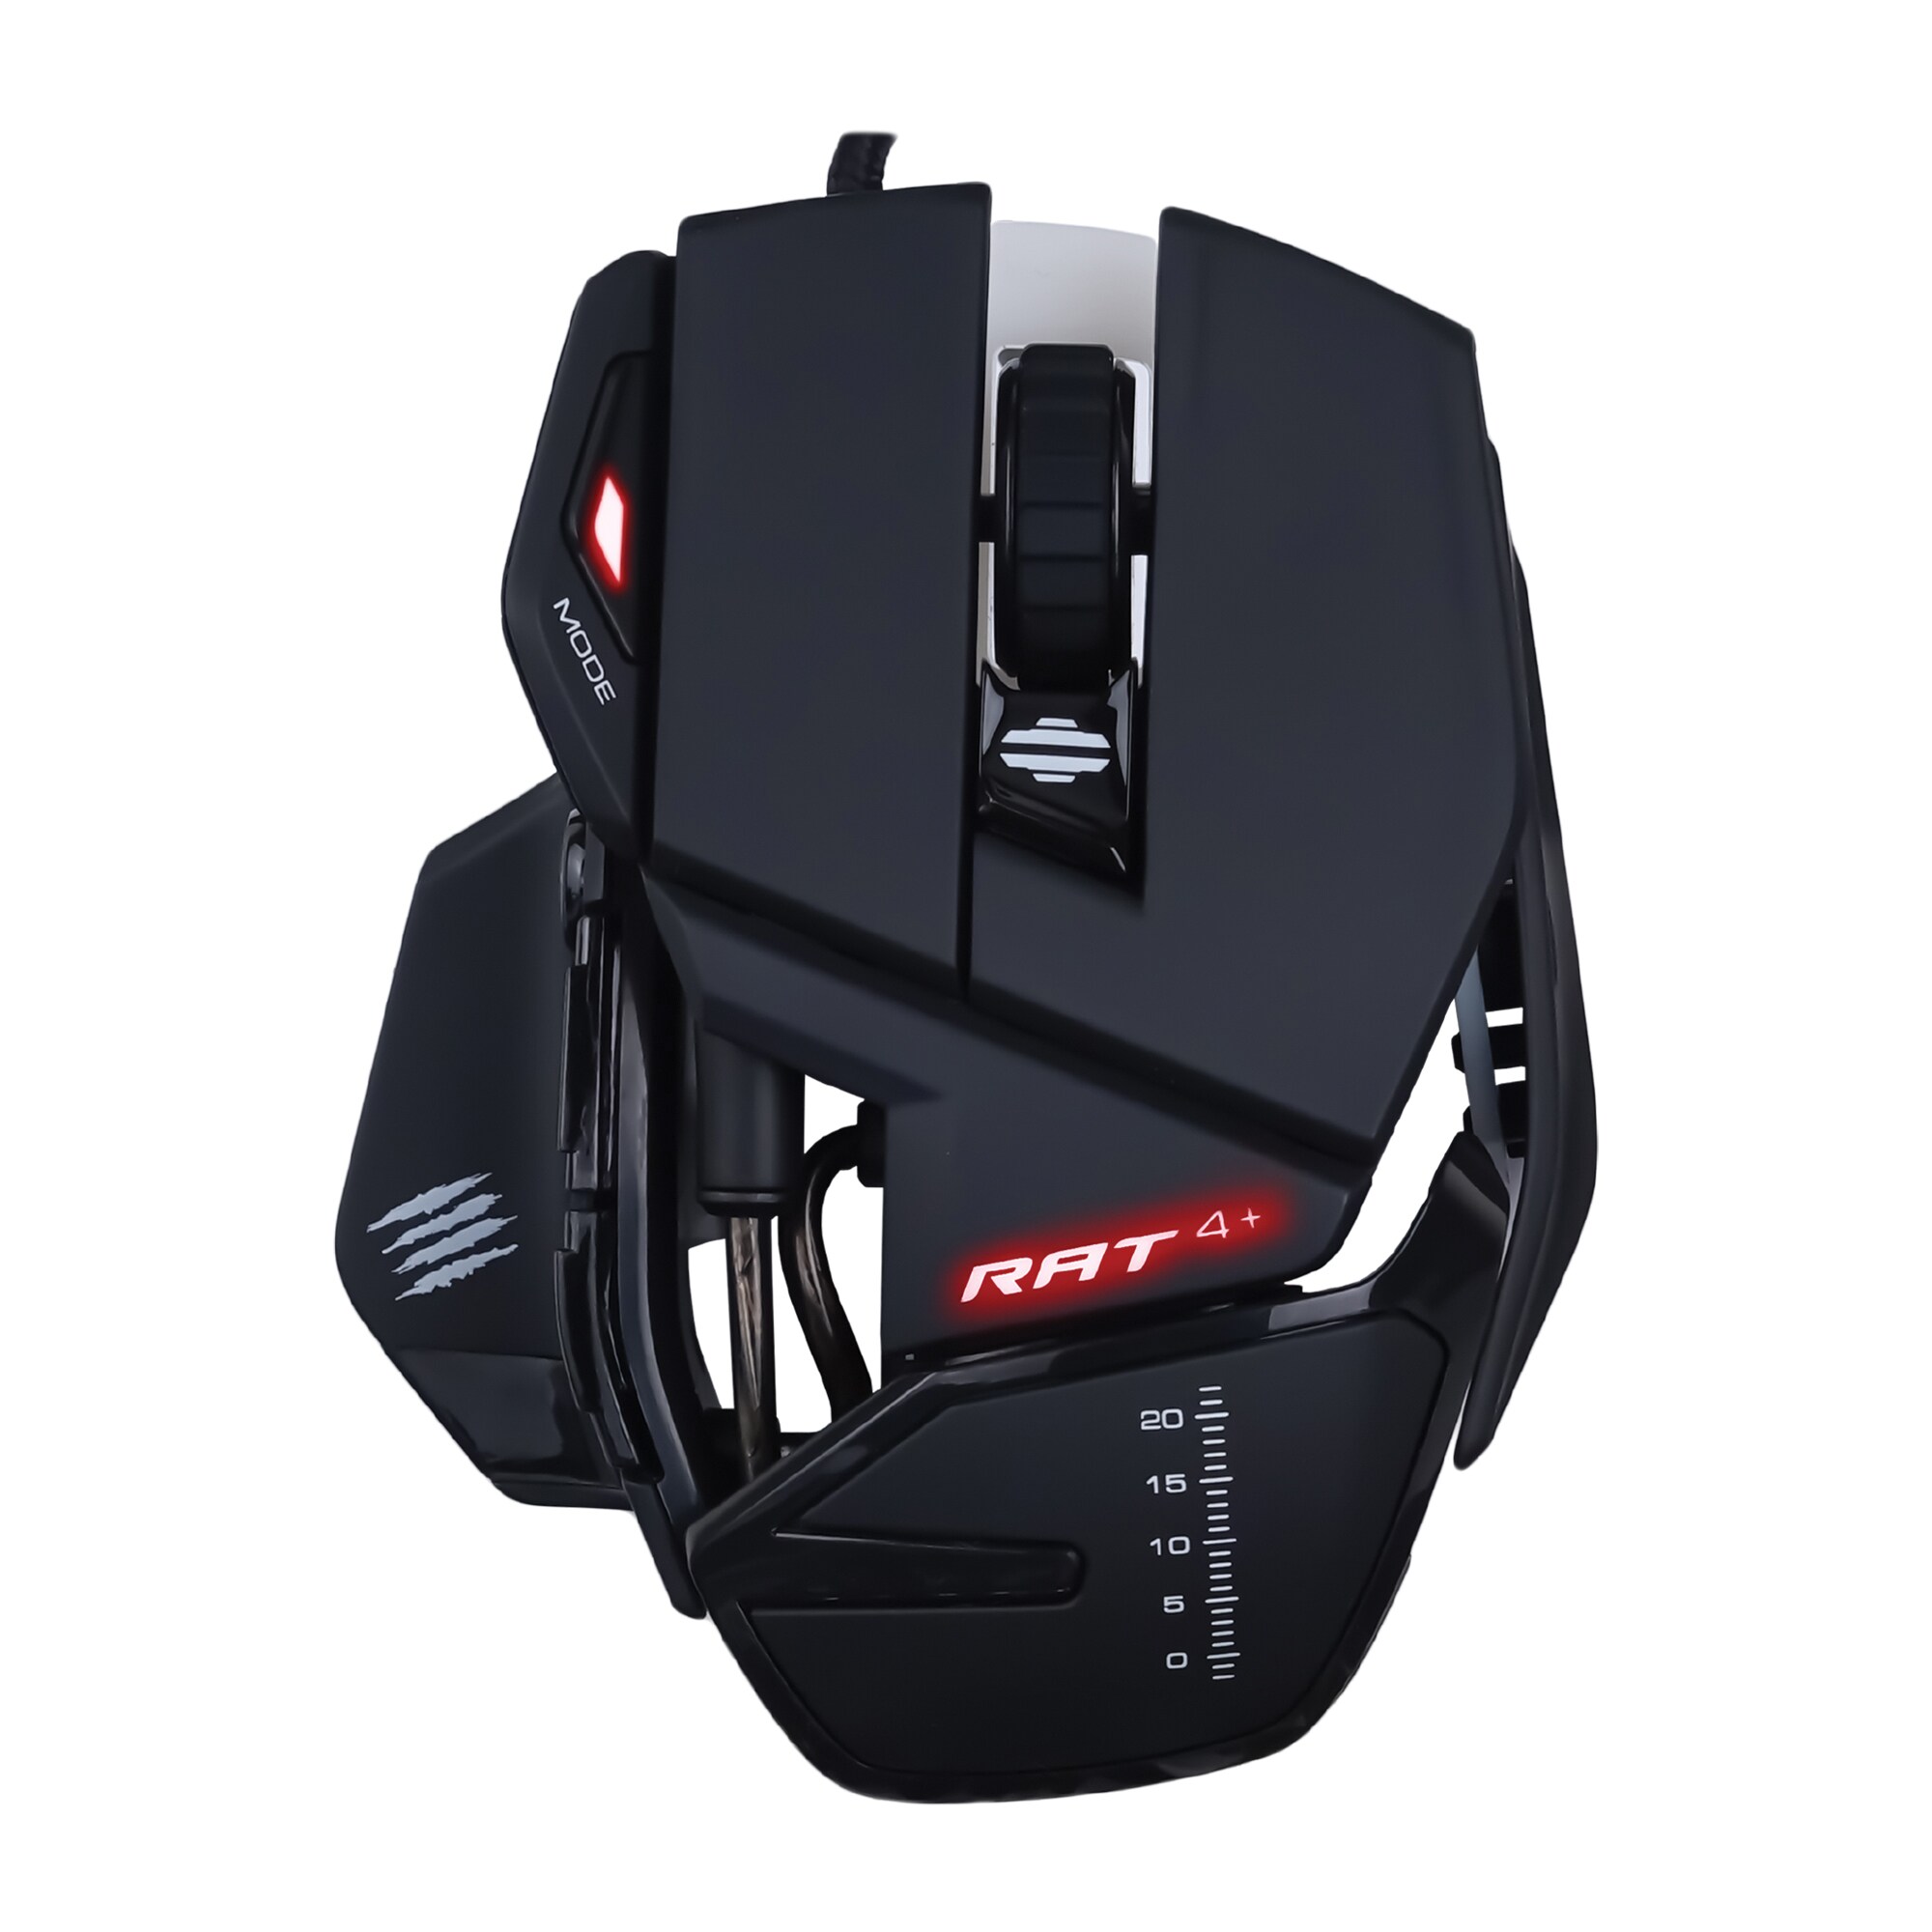 MAD CATZ Black Gaming Mouse in Video Gaming department at Lowes.com